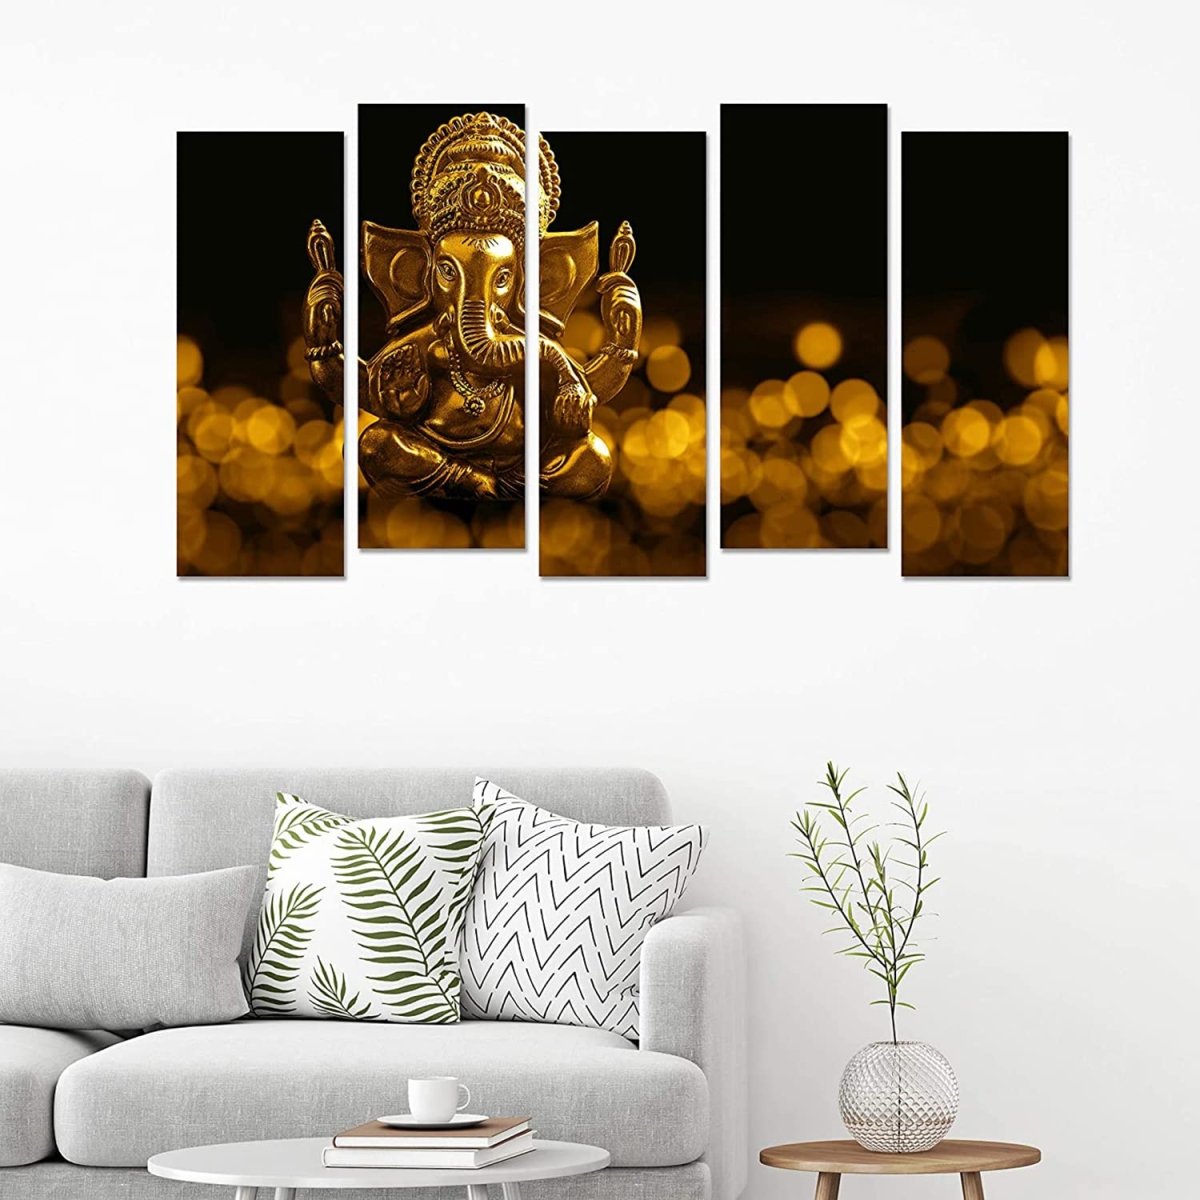 Metalkart Special Ganesha in the Glimmering Dark: A Pentalogue Wall Painting (Set of 5)